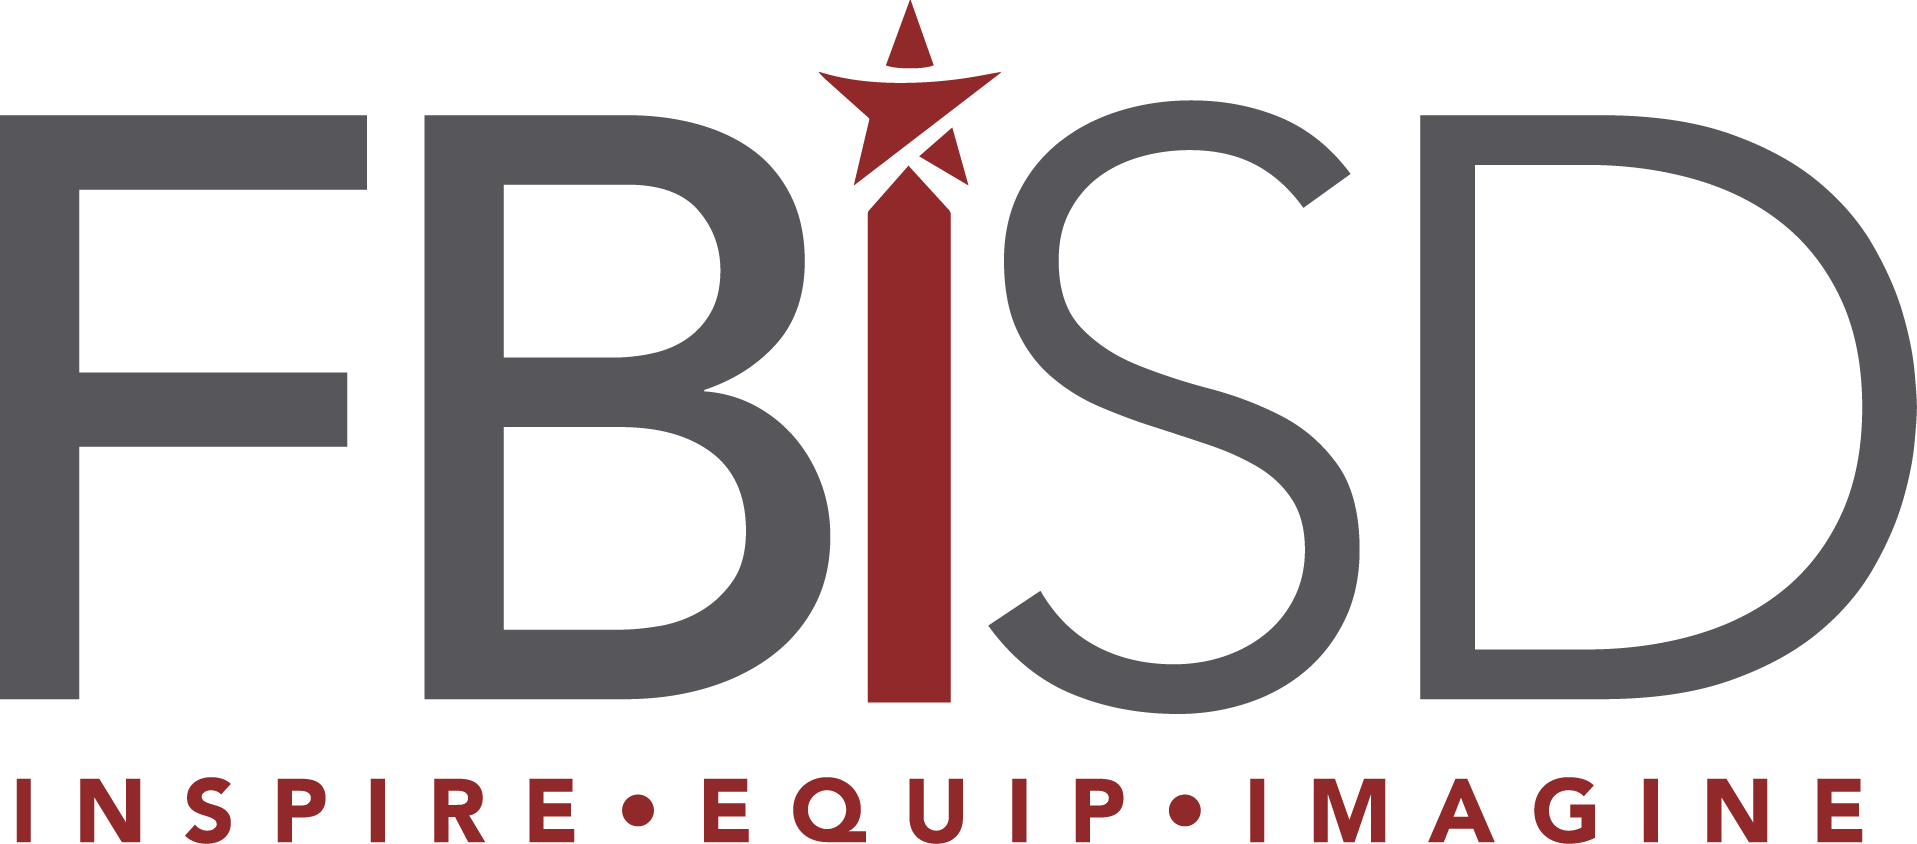 October 2021 - Fort Bend ISD's Focus Group logo